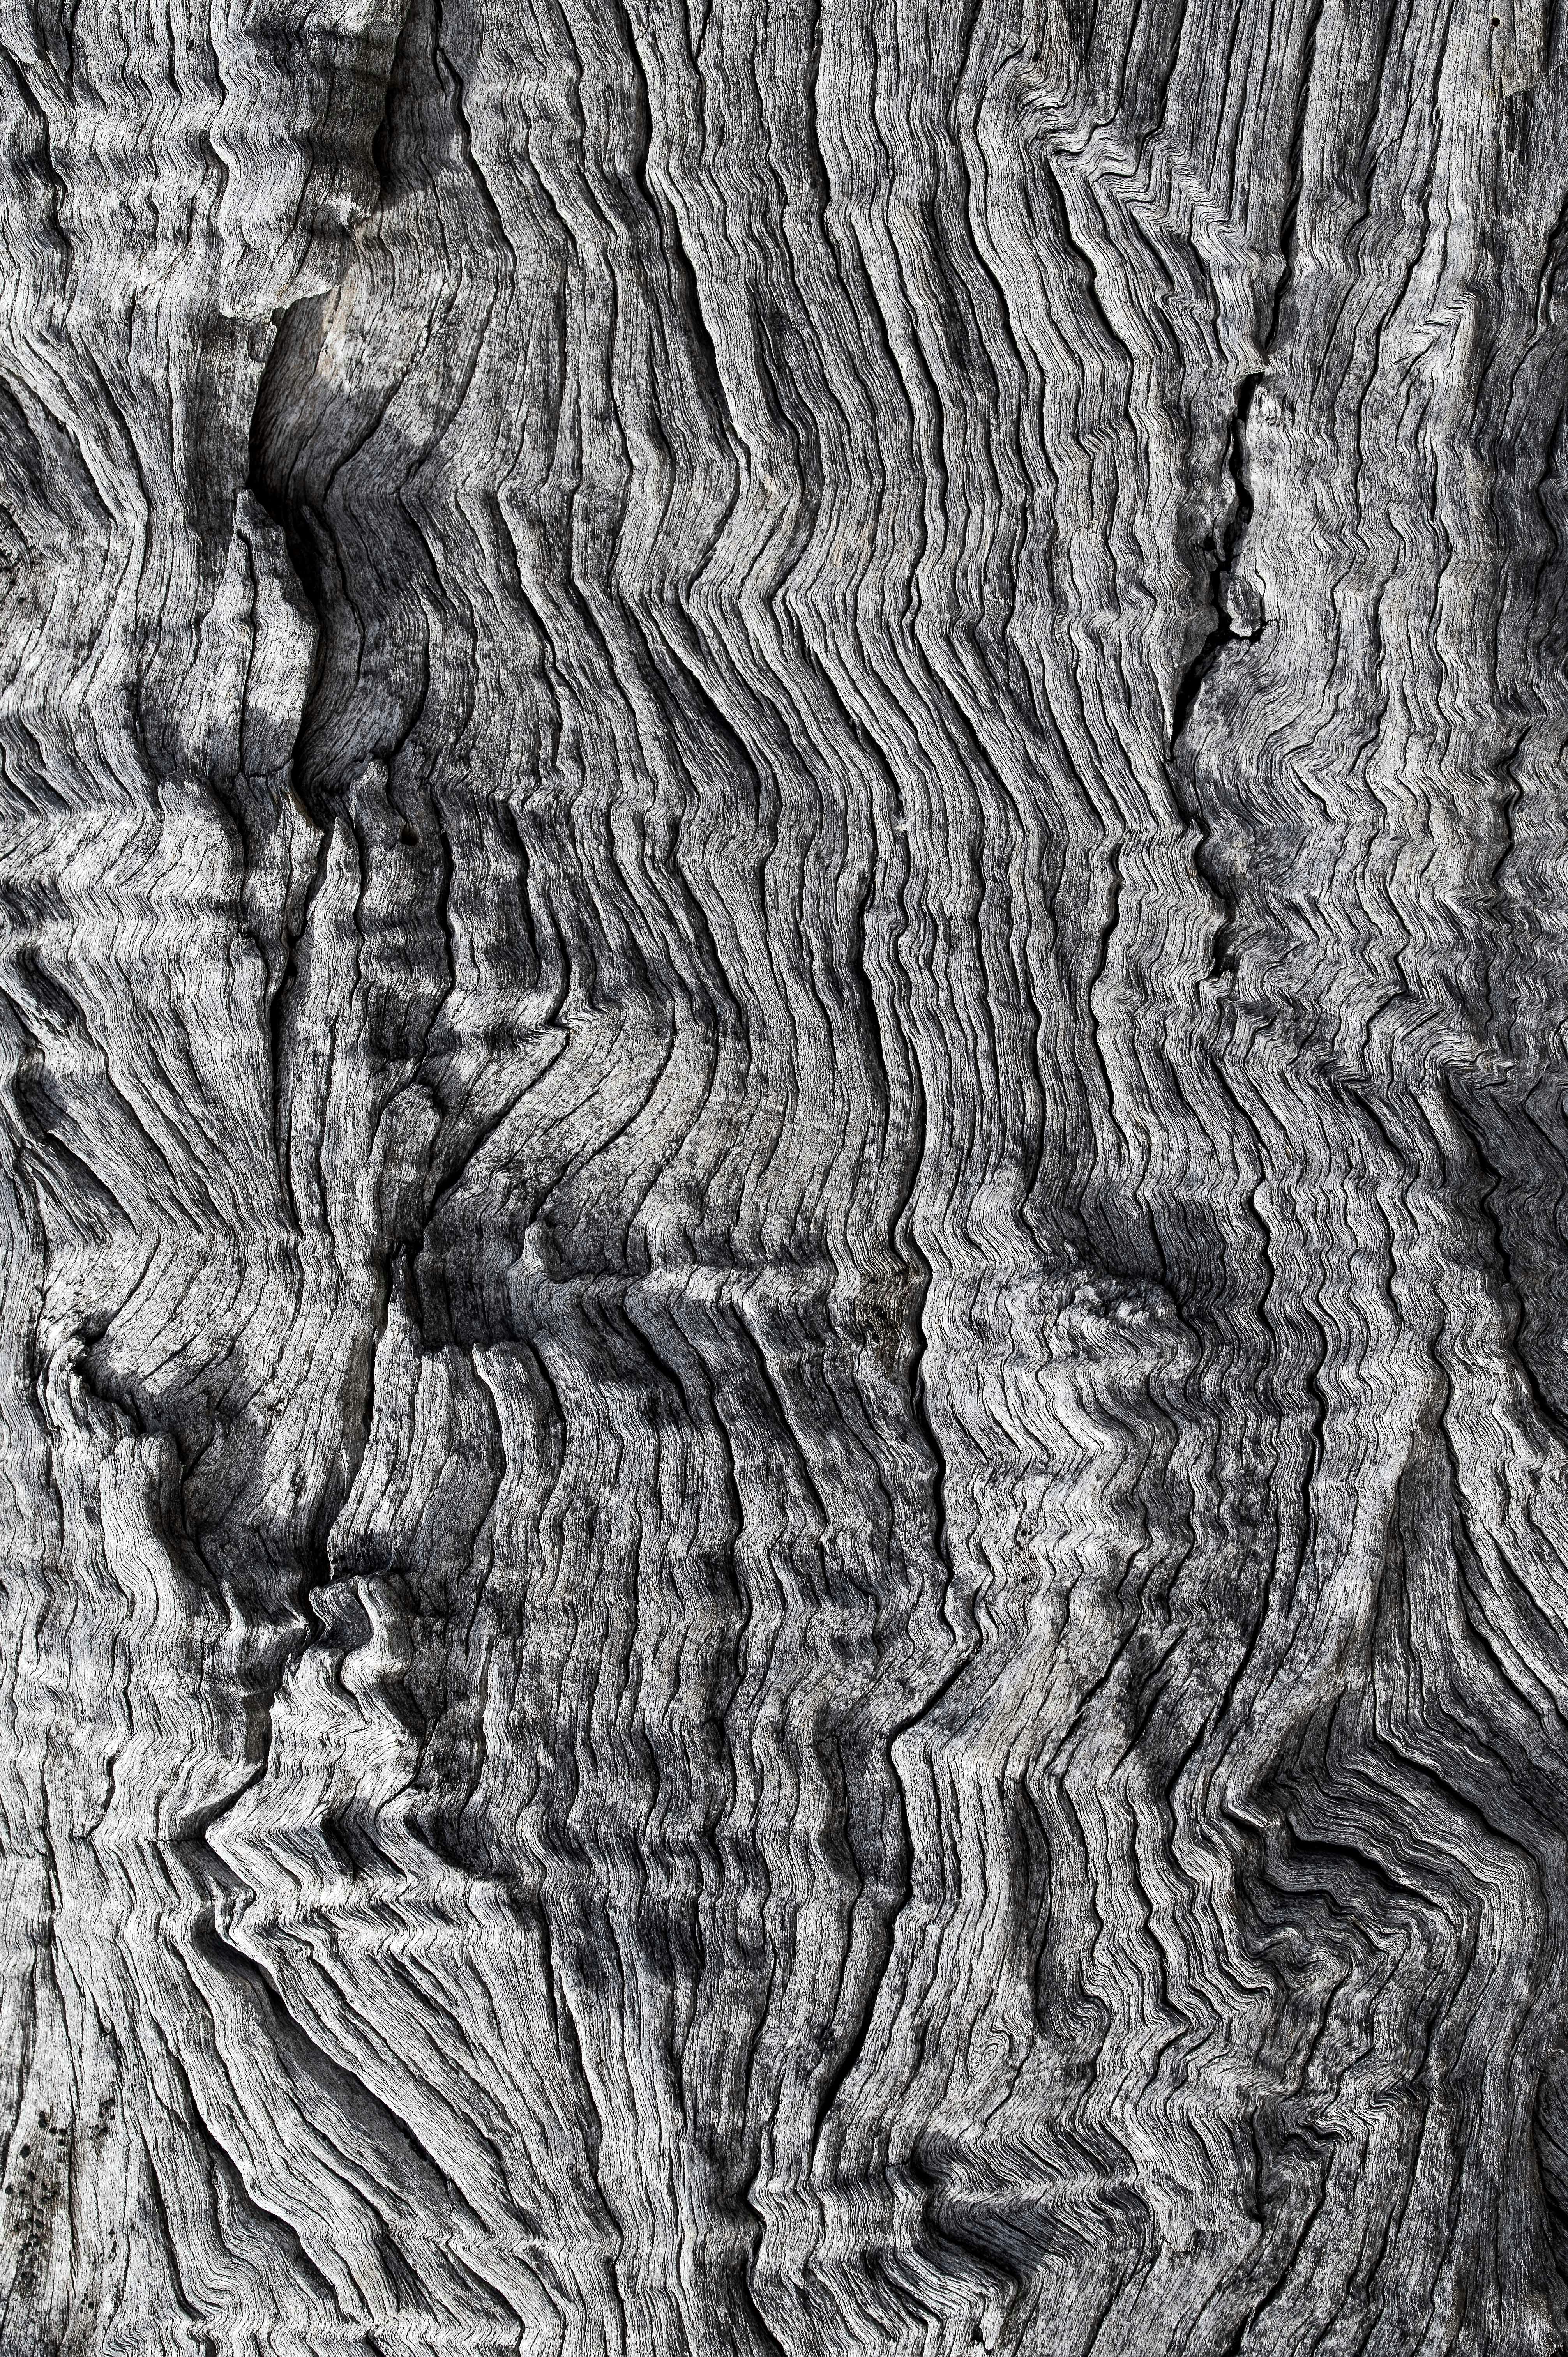 grey and black tree trunk